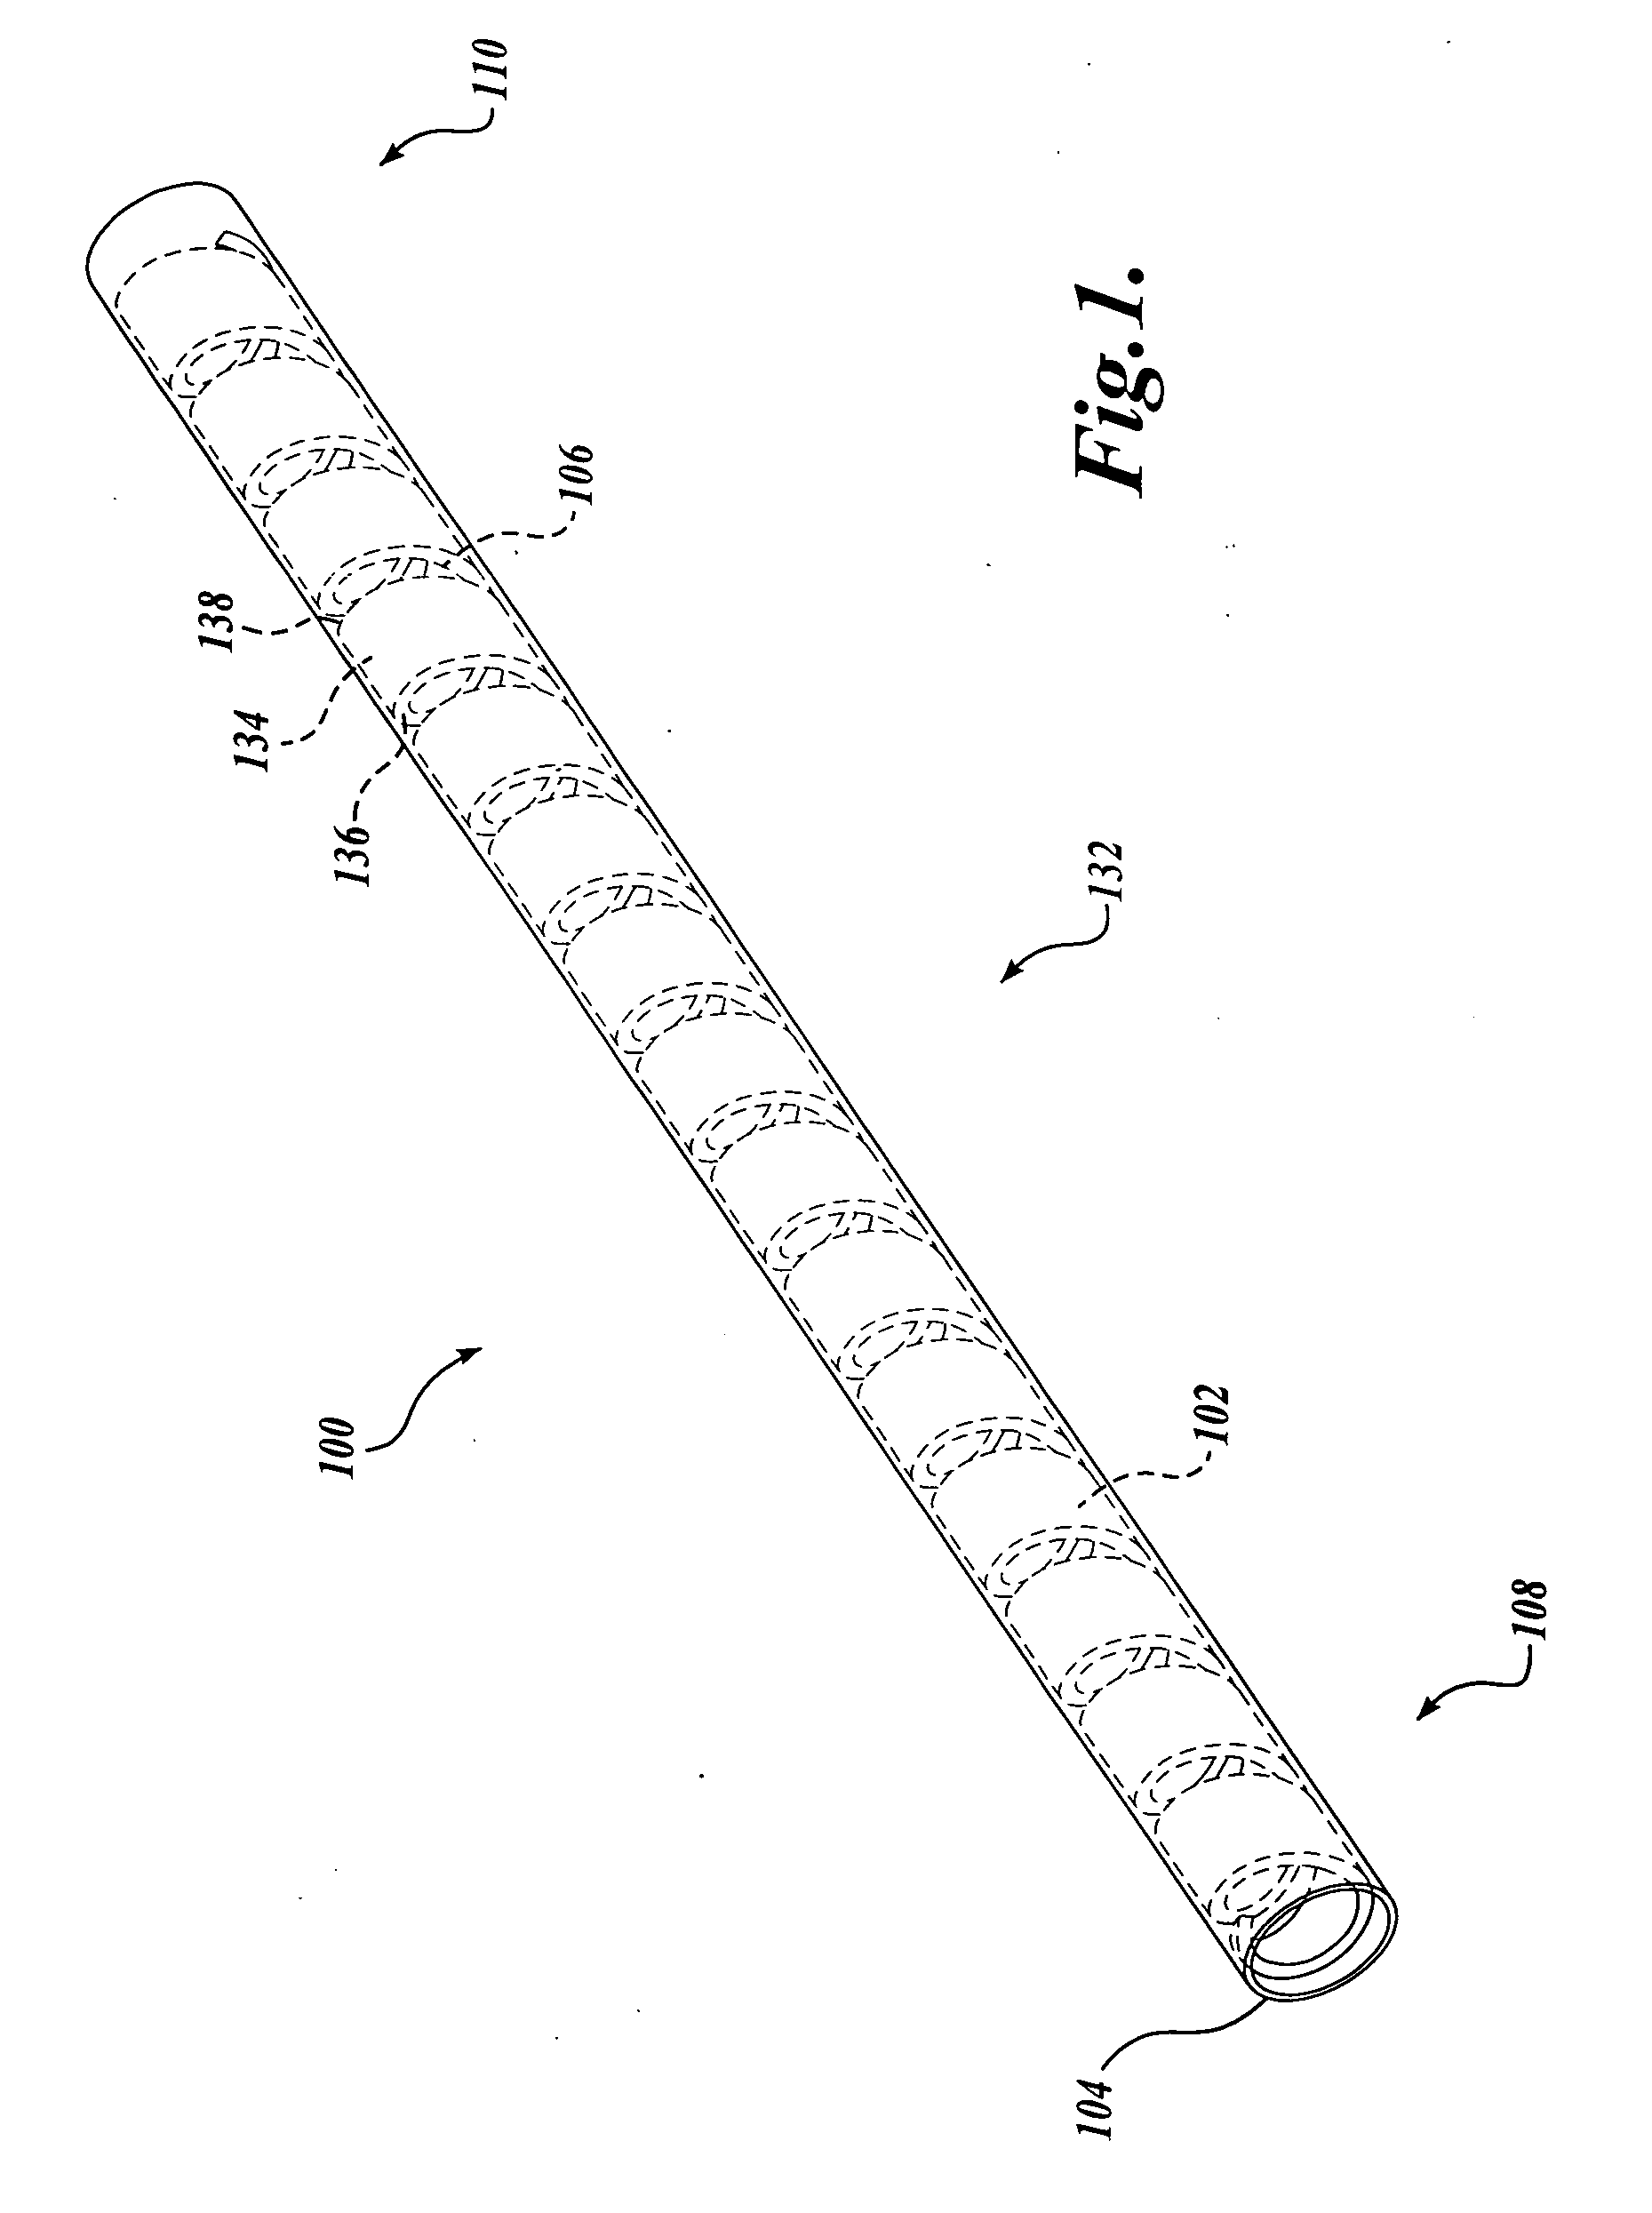 Flexible endoscope with variable stiffness shaft